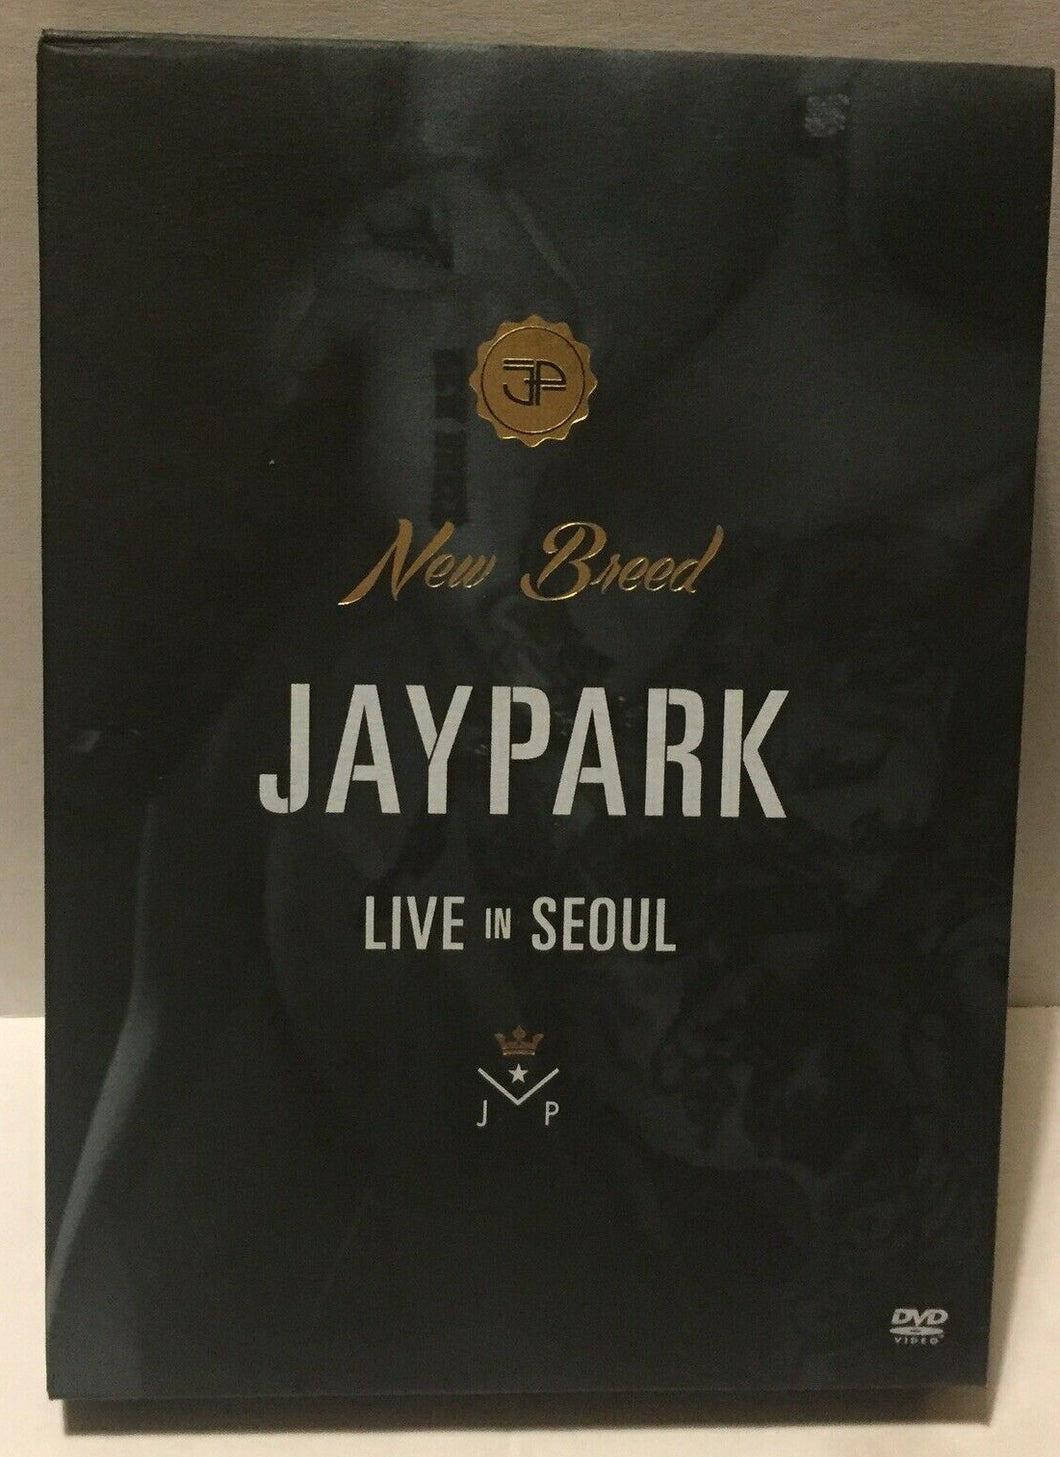 JAY PARK - NEW BREED - LIVE IN SEOUL 2X DVD & BOOKLET SET - K-POP  (USED)